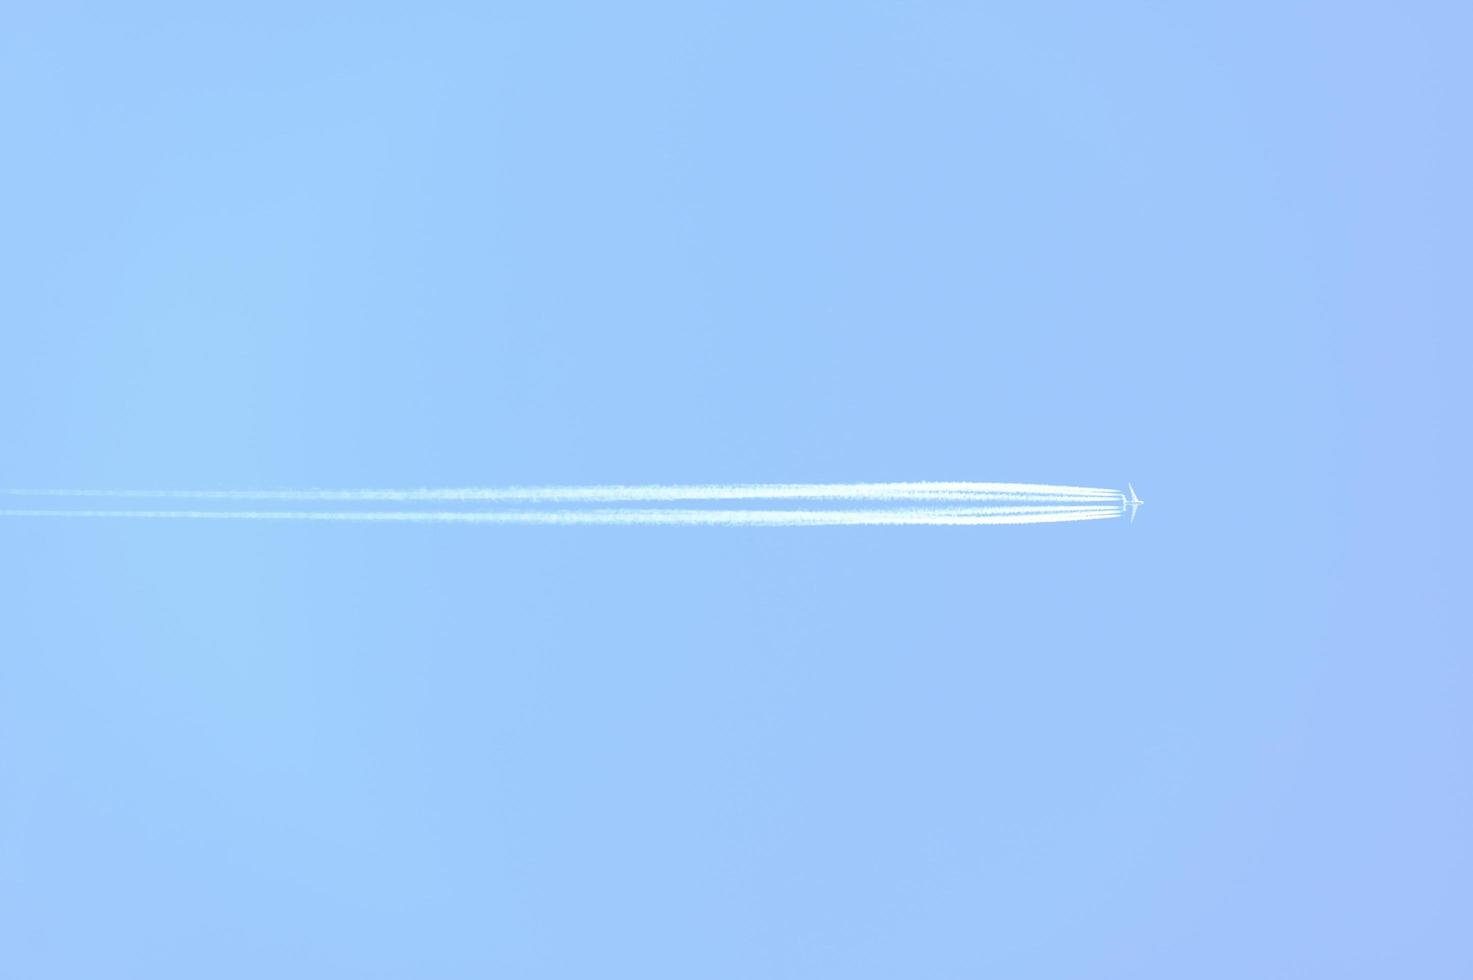 Traces and white streaks from the jet engines in the plane, white stripes in the sky. photo